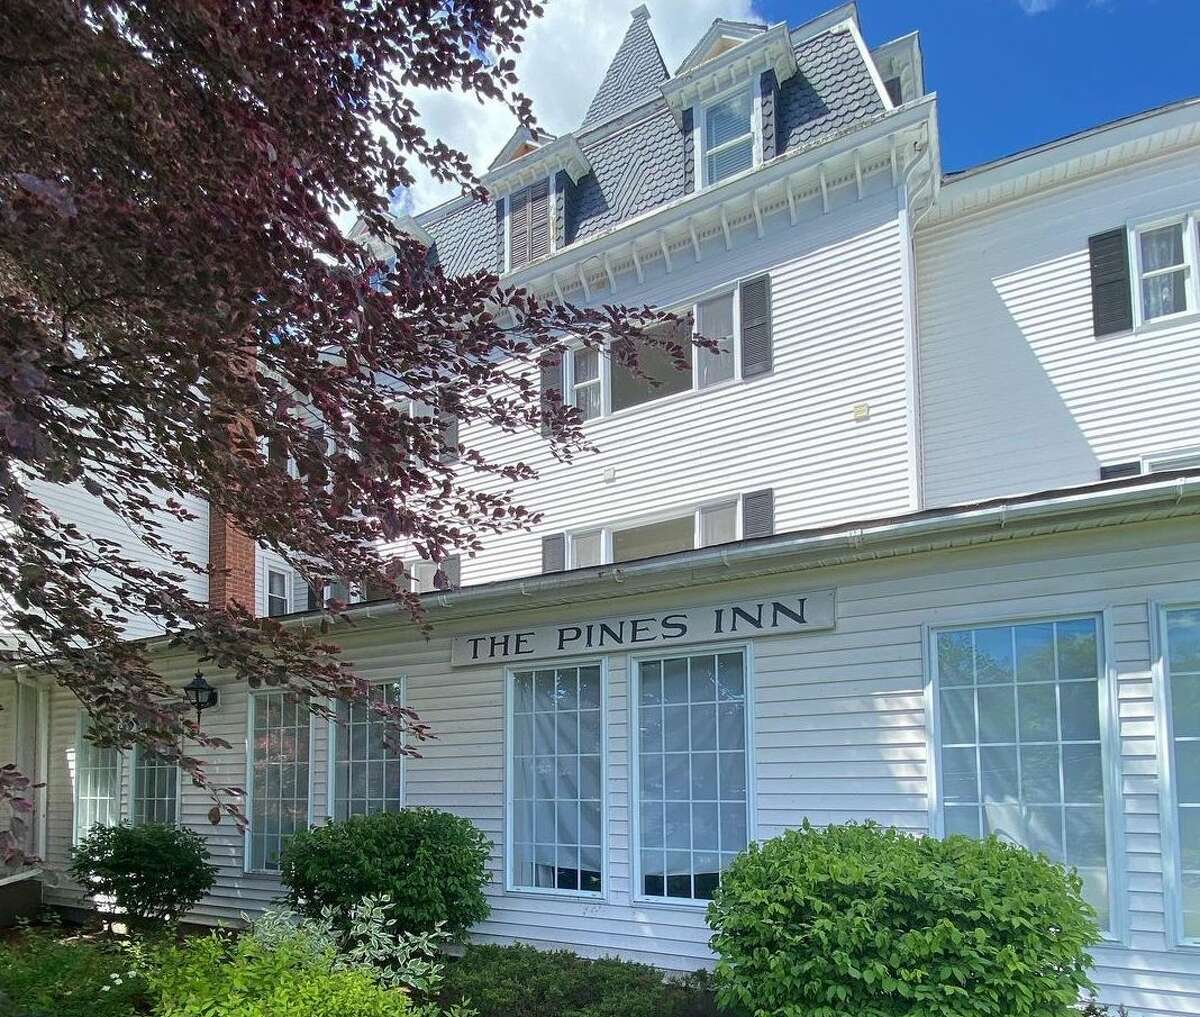 The Pines Inn is the largest of the lodges at the Thompson House property that Wylder Windham is restoring for a 2022 opening.